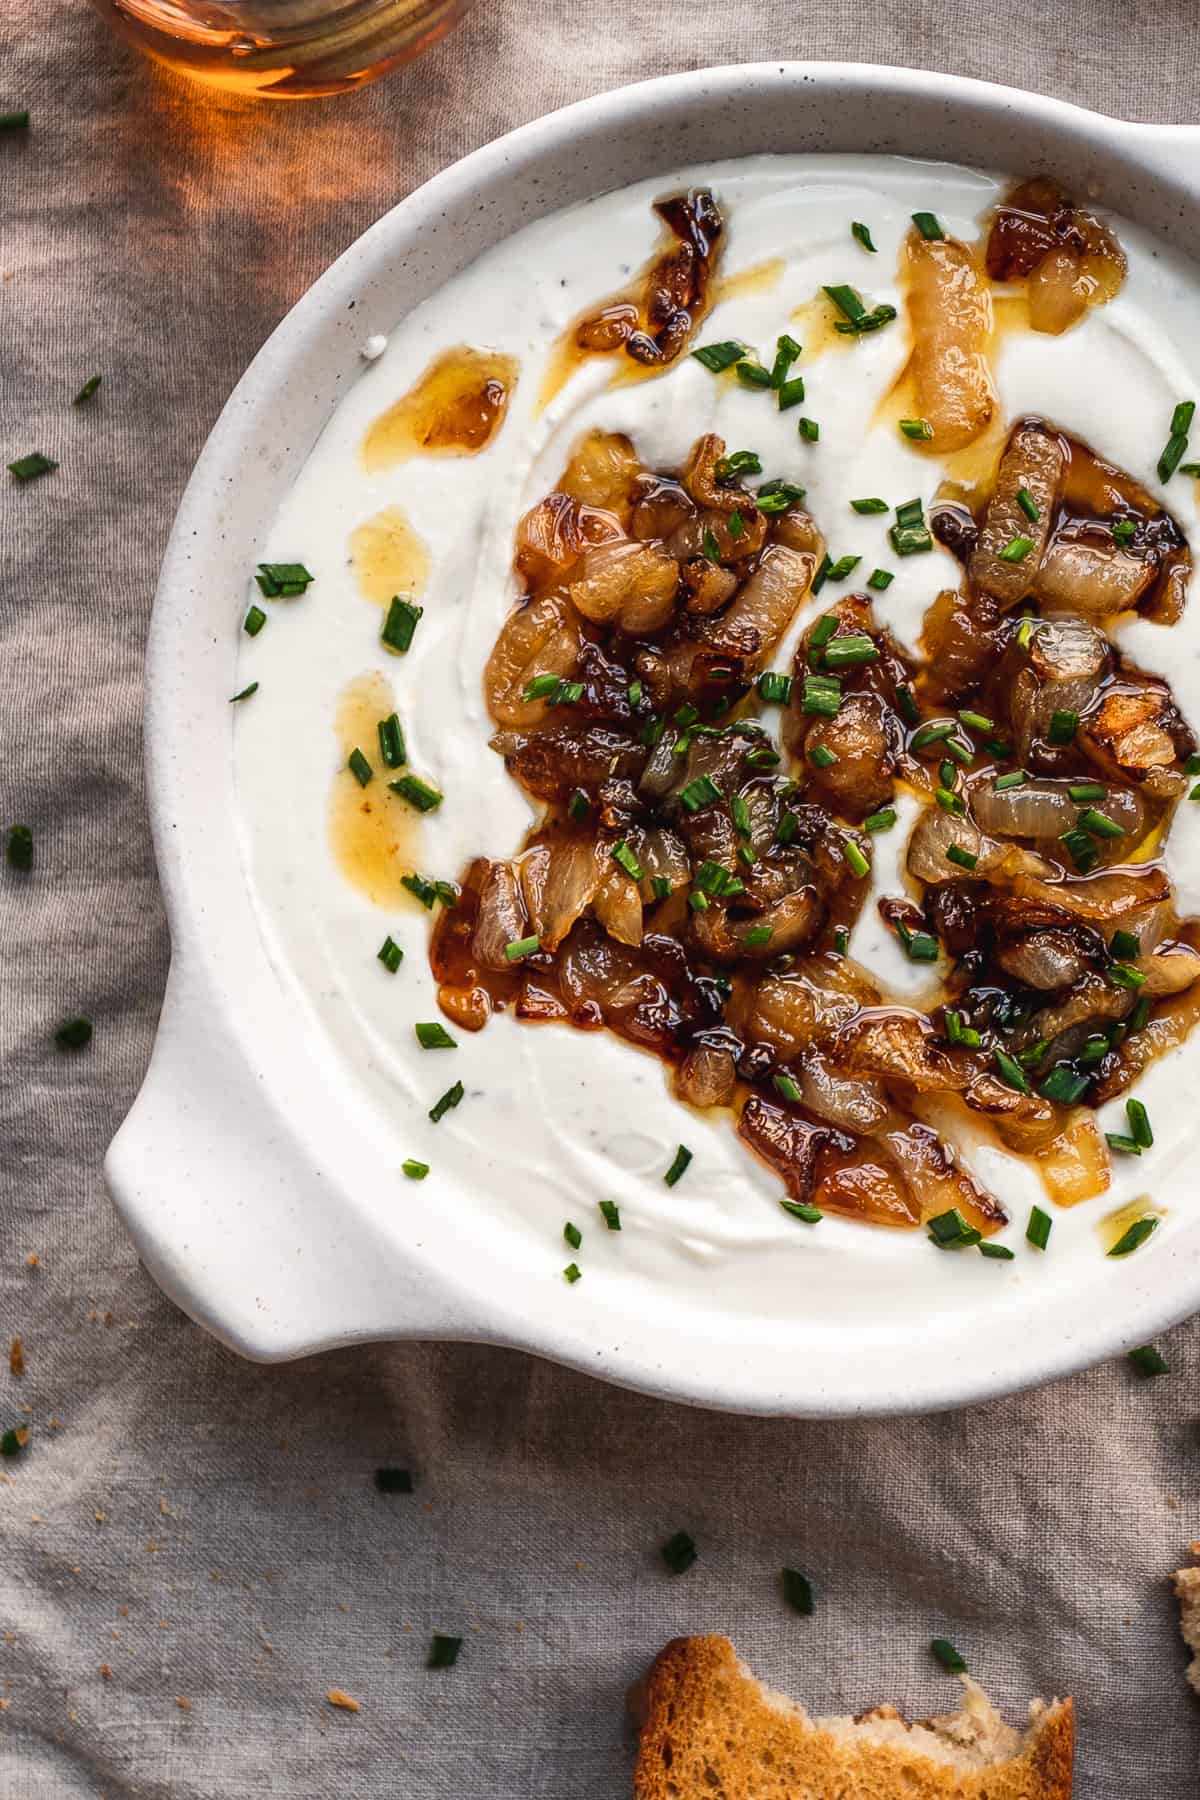 Whipped goat cheese with caramelized onions on top on a gray tablecloth.